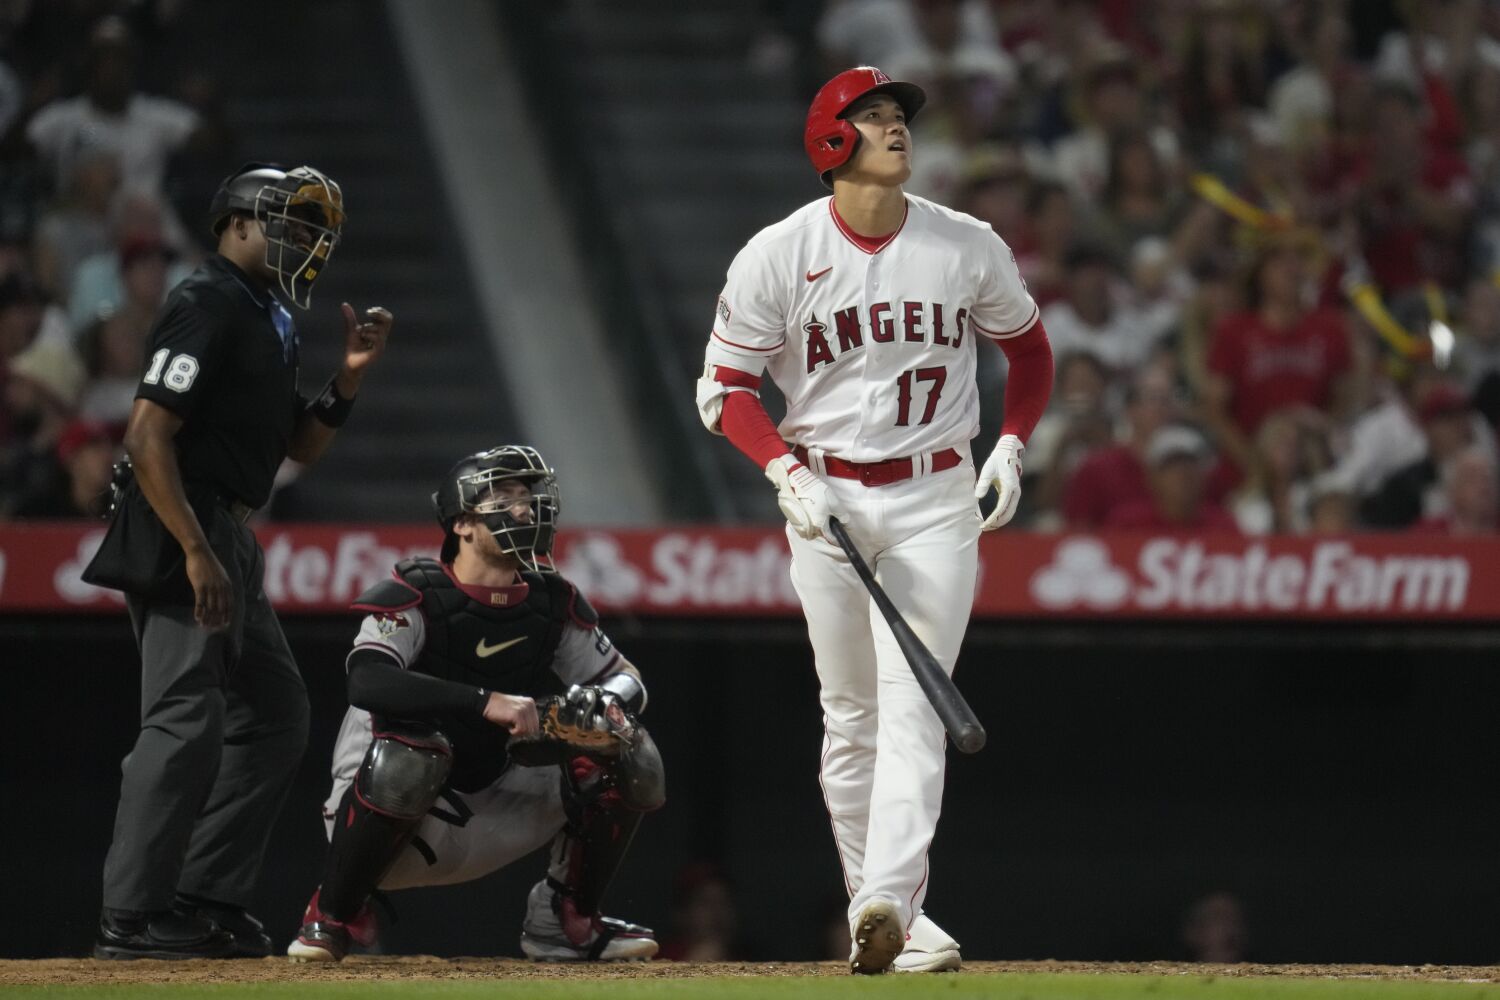 Watch: Shohei Ohtani smashes another record during Angels' loss